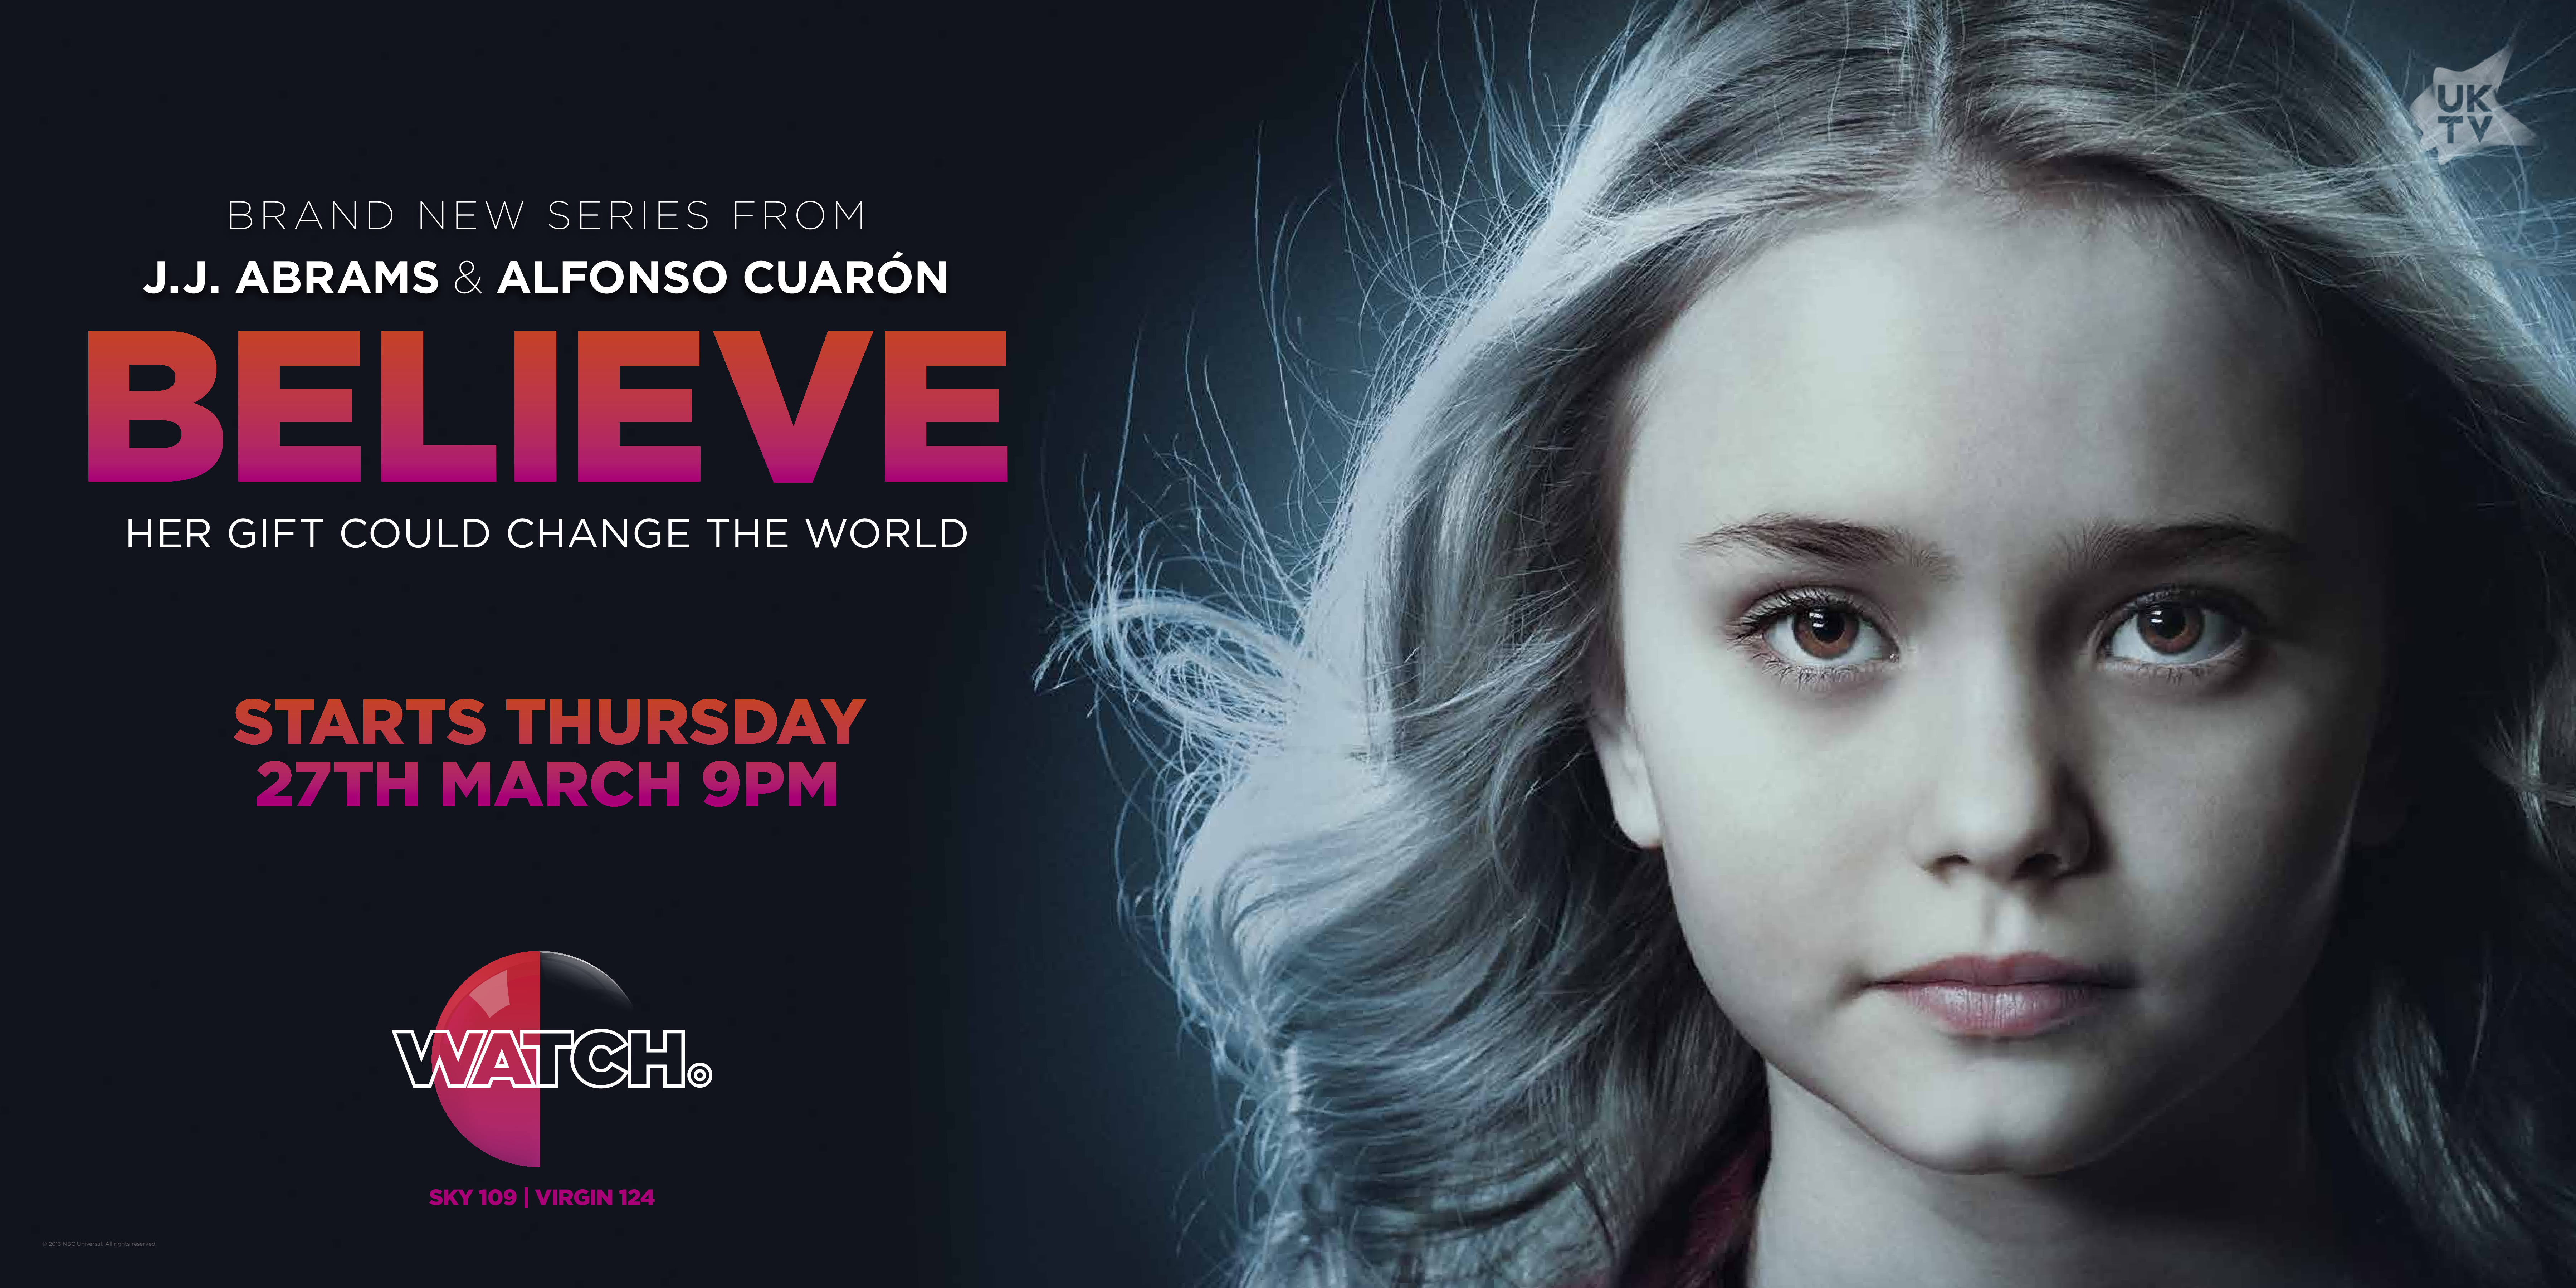 New US drama ‘Believe’ airing on Watch – Behind the Scenes video